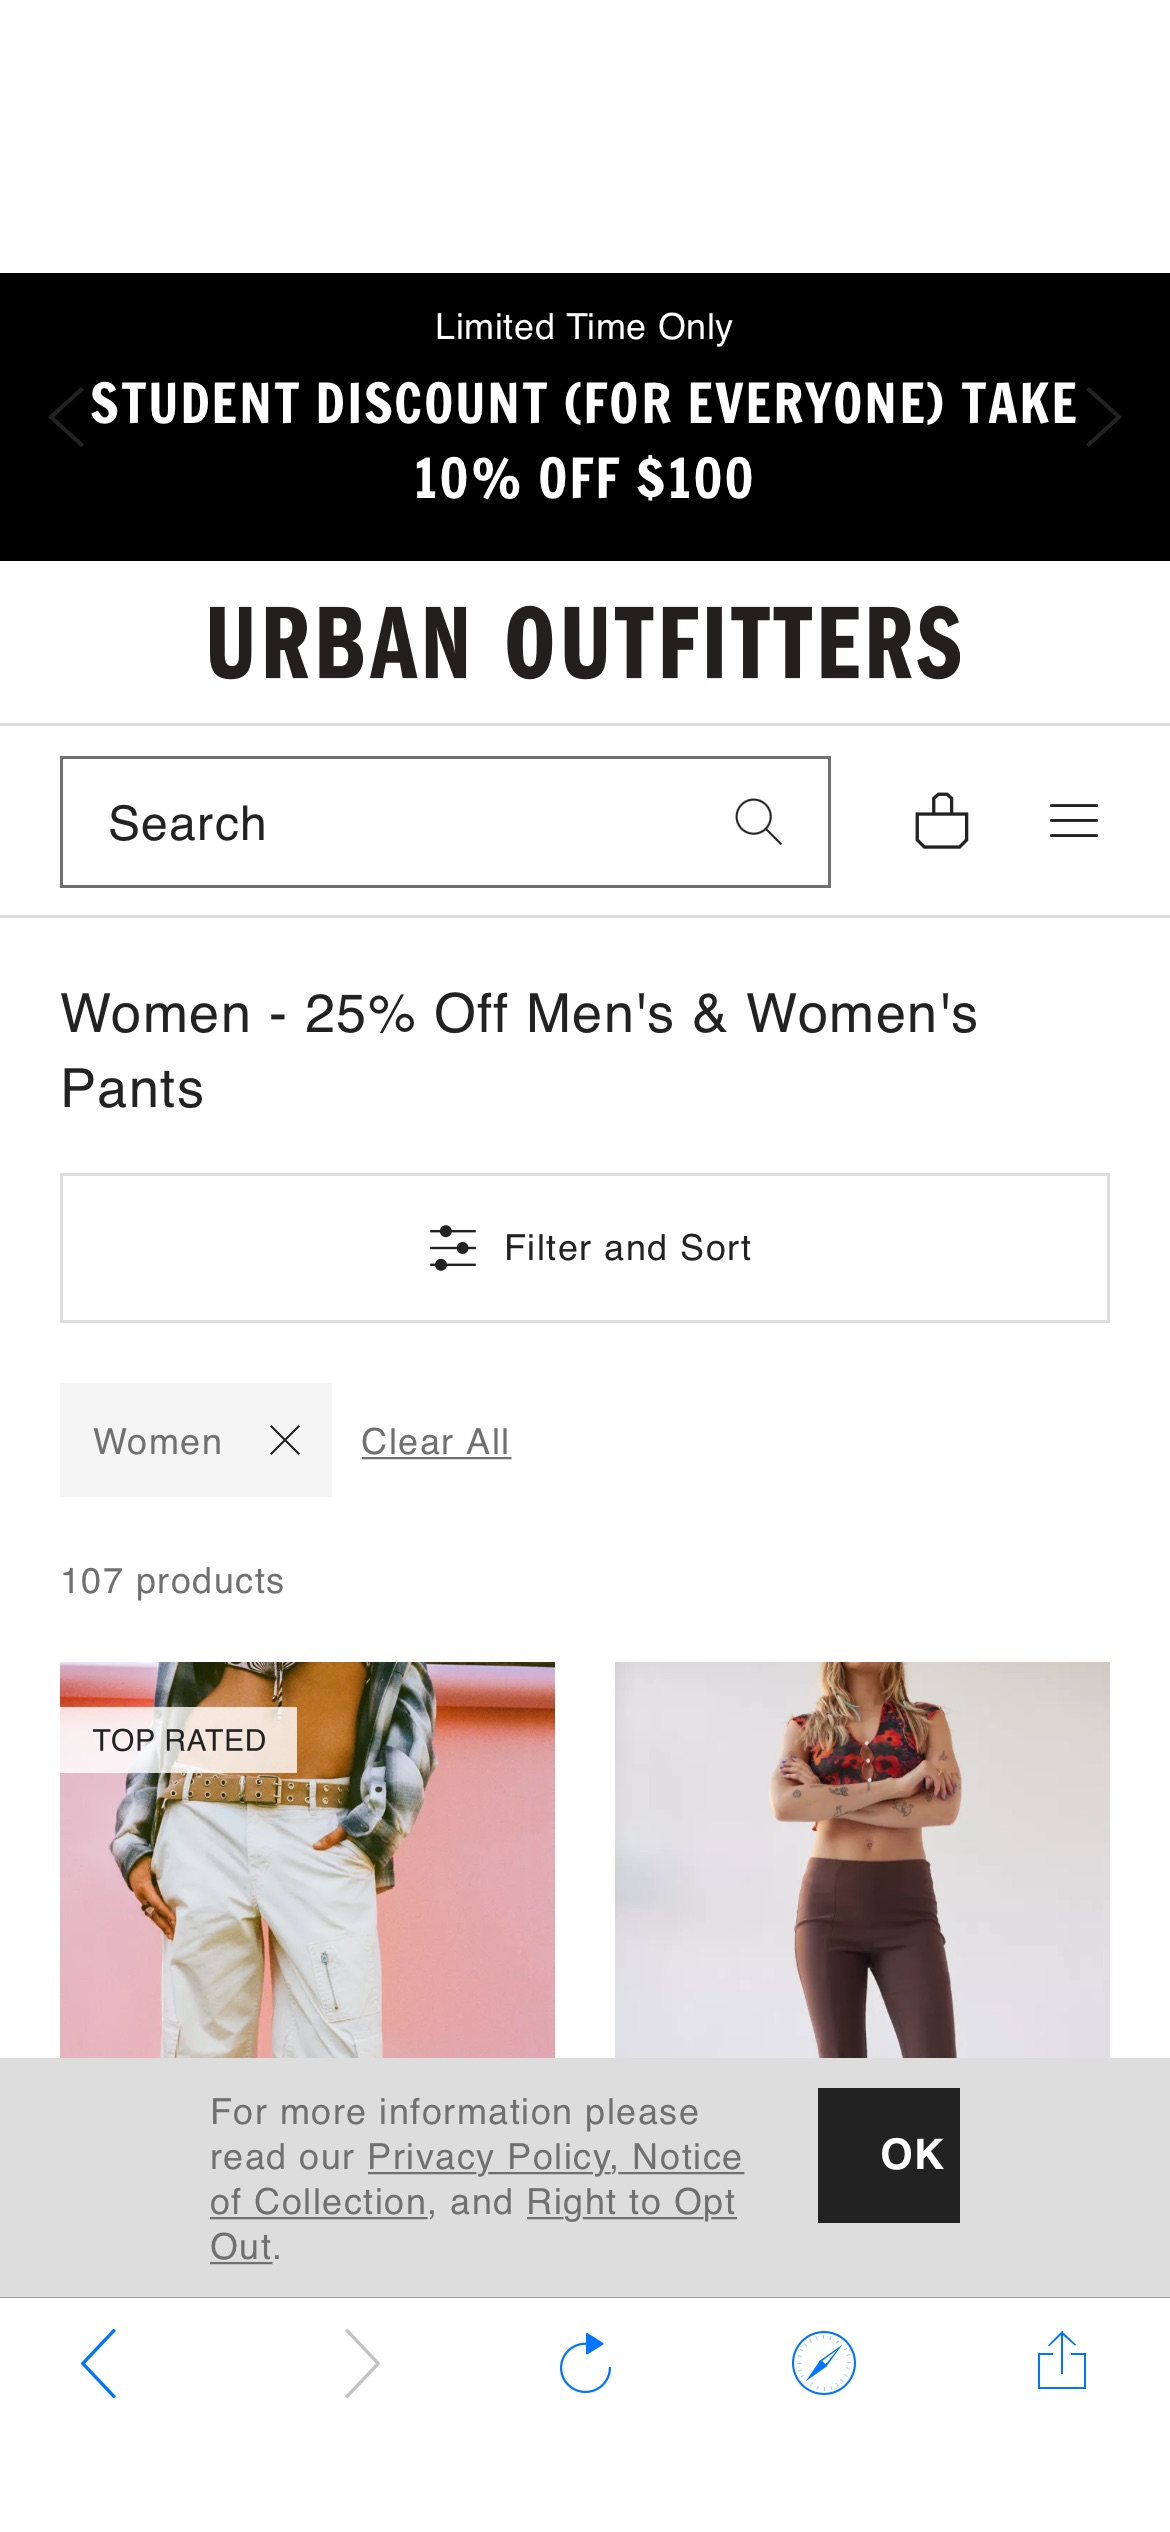 Women - 25% Off Men's & Women's Pants | Urban Outfitters Sale | Urban Outfitters